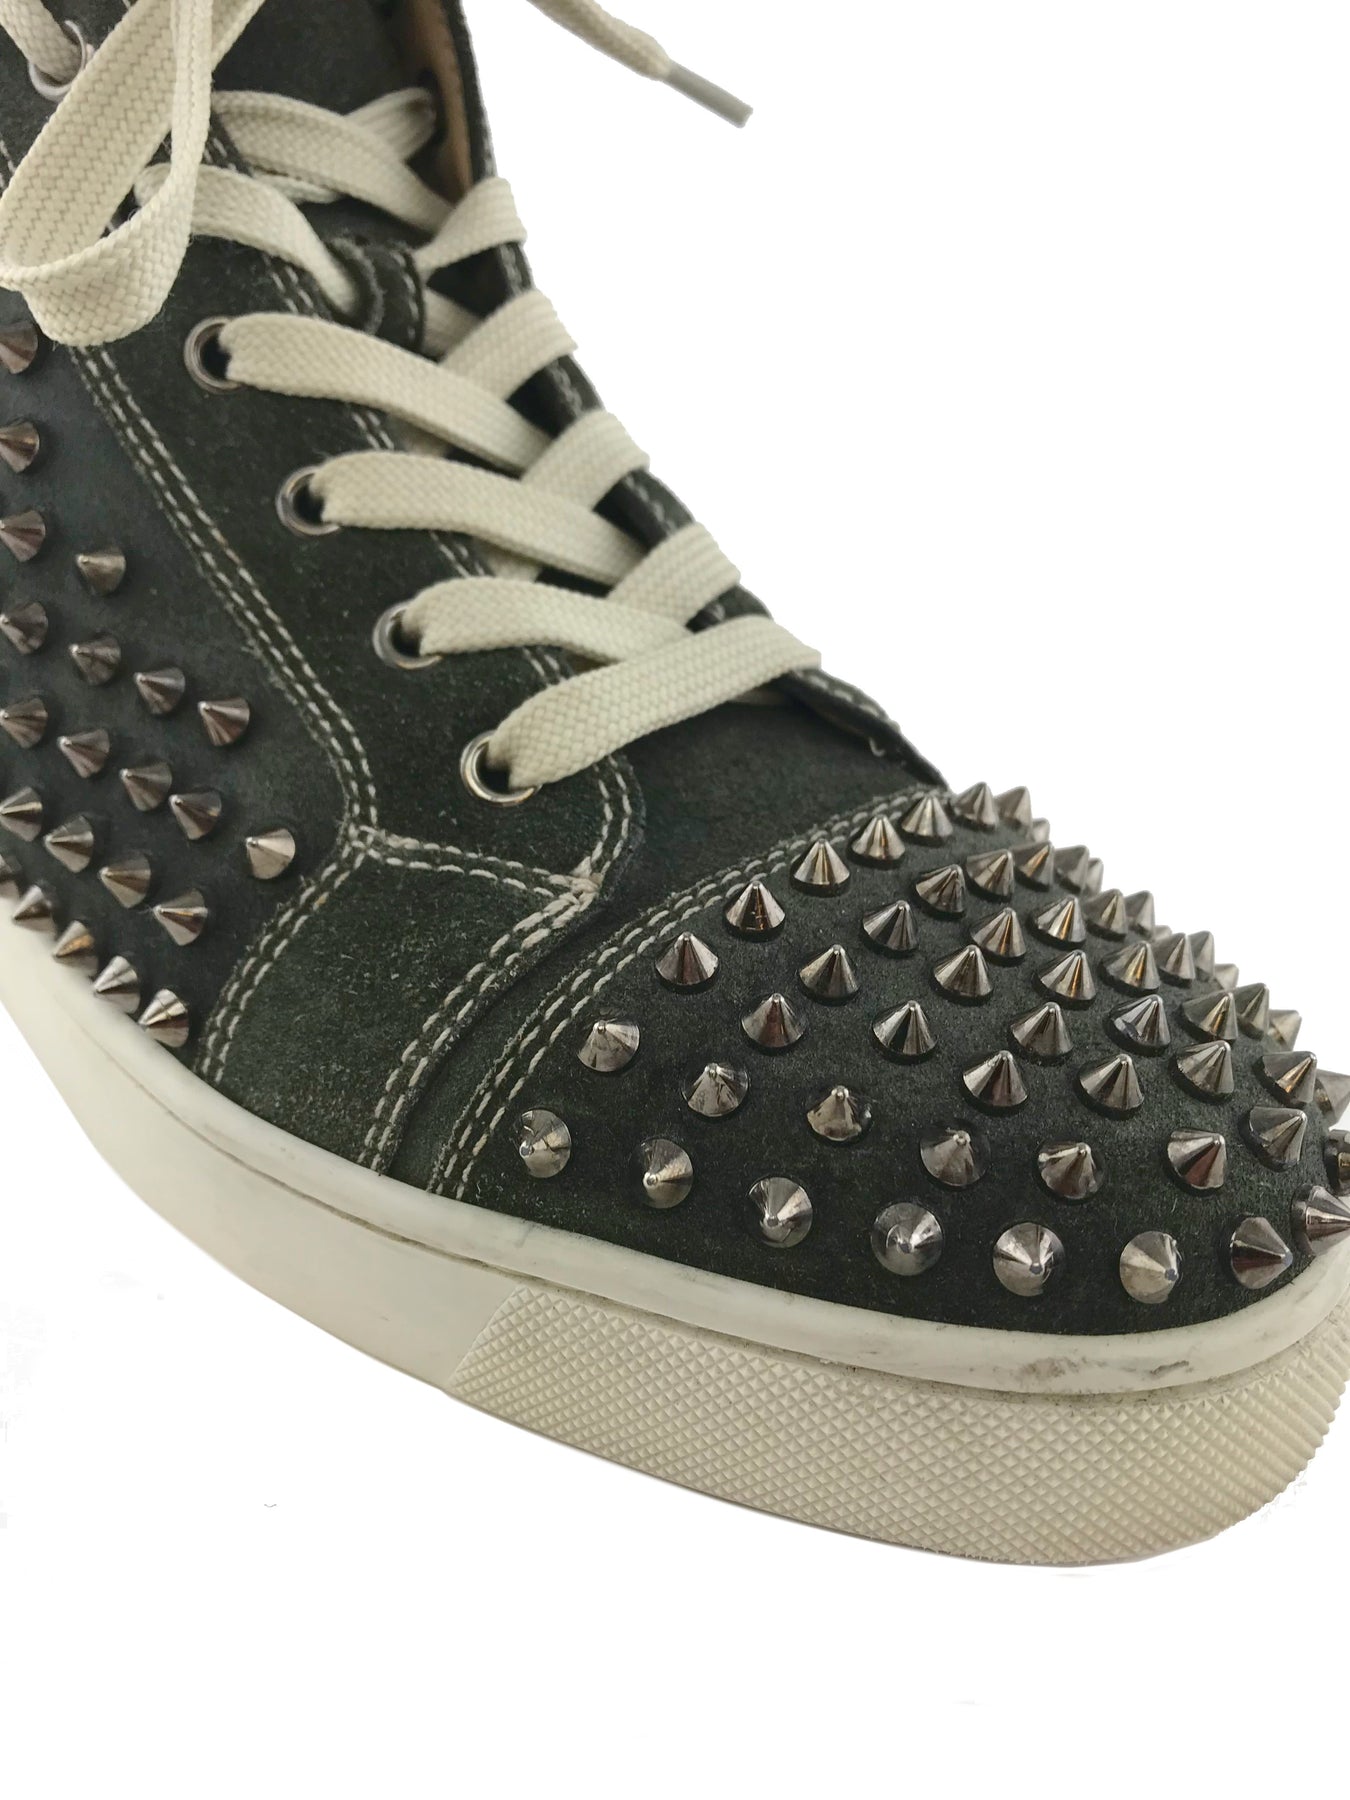 Shoes, Louis Vuitton Spiked Sneakers Size 11